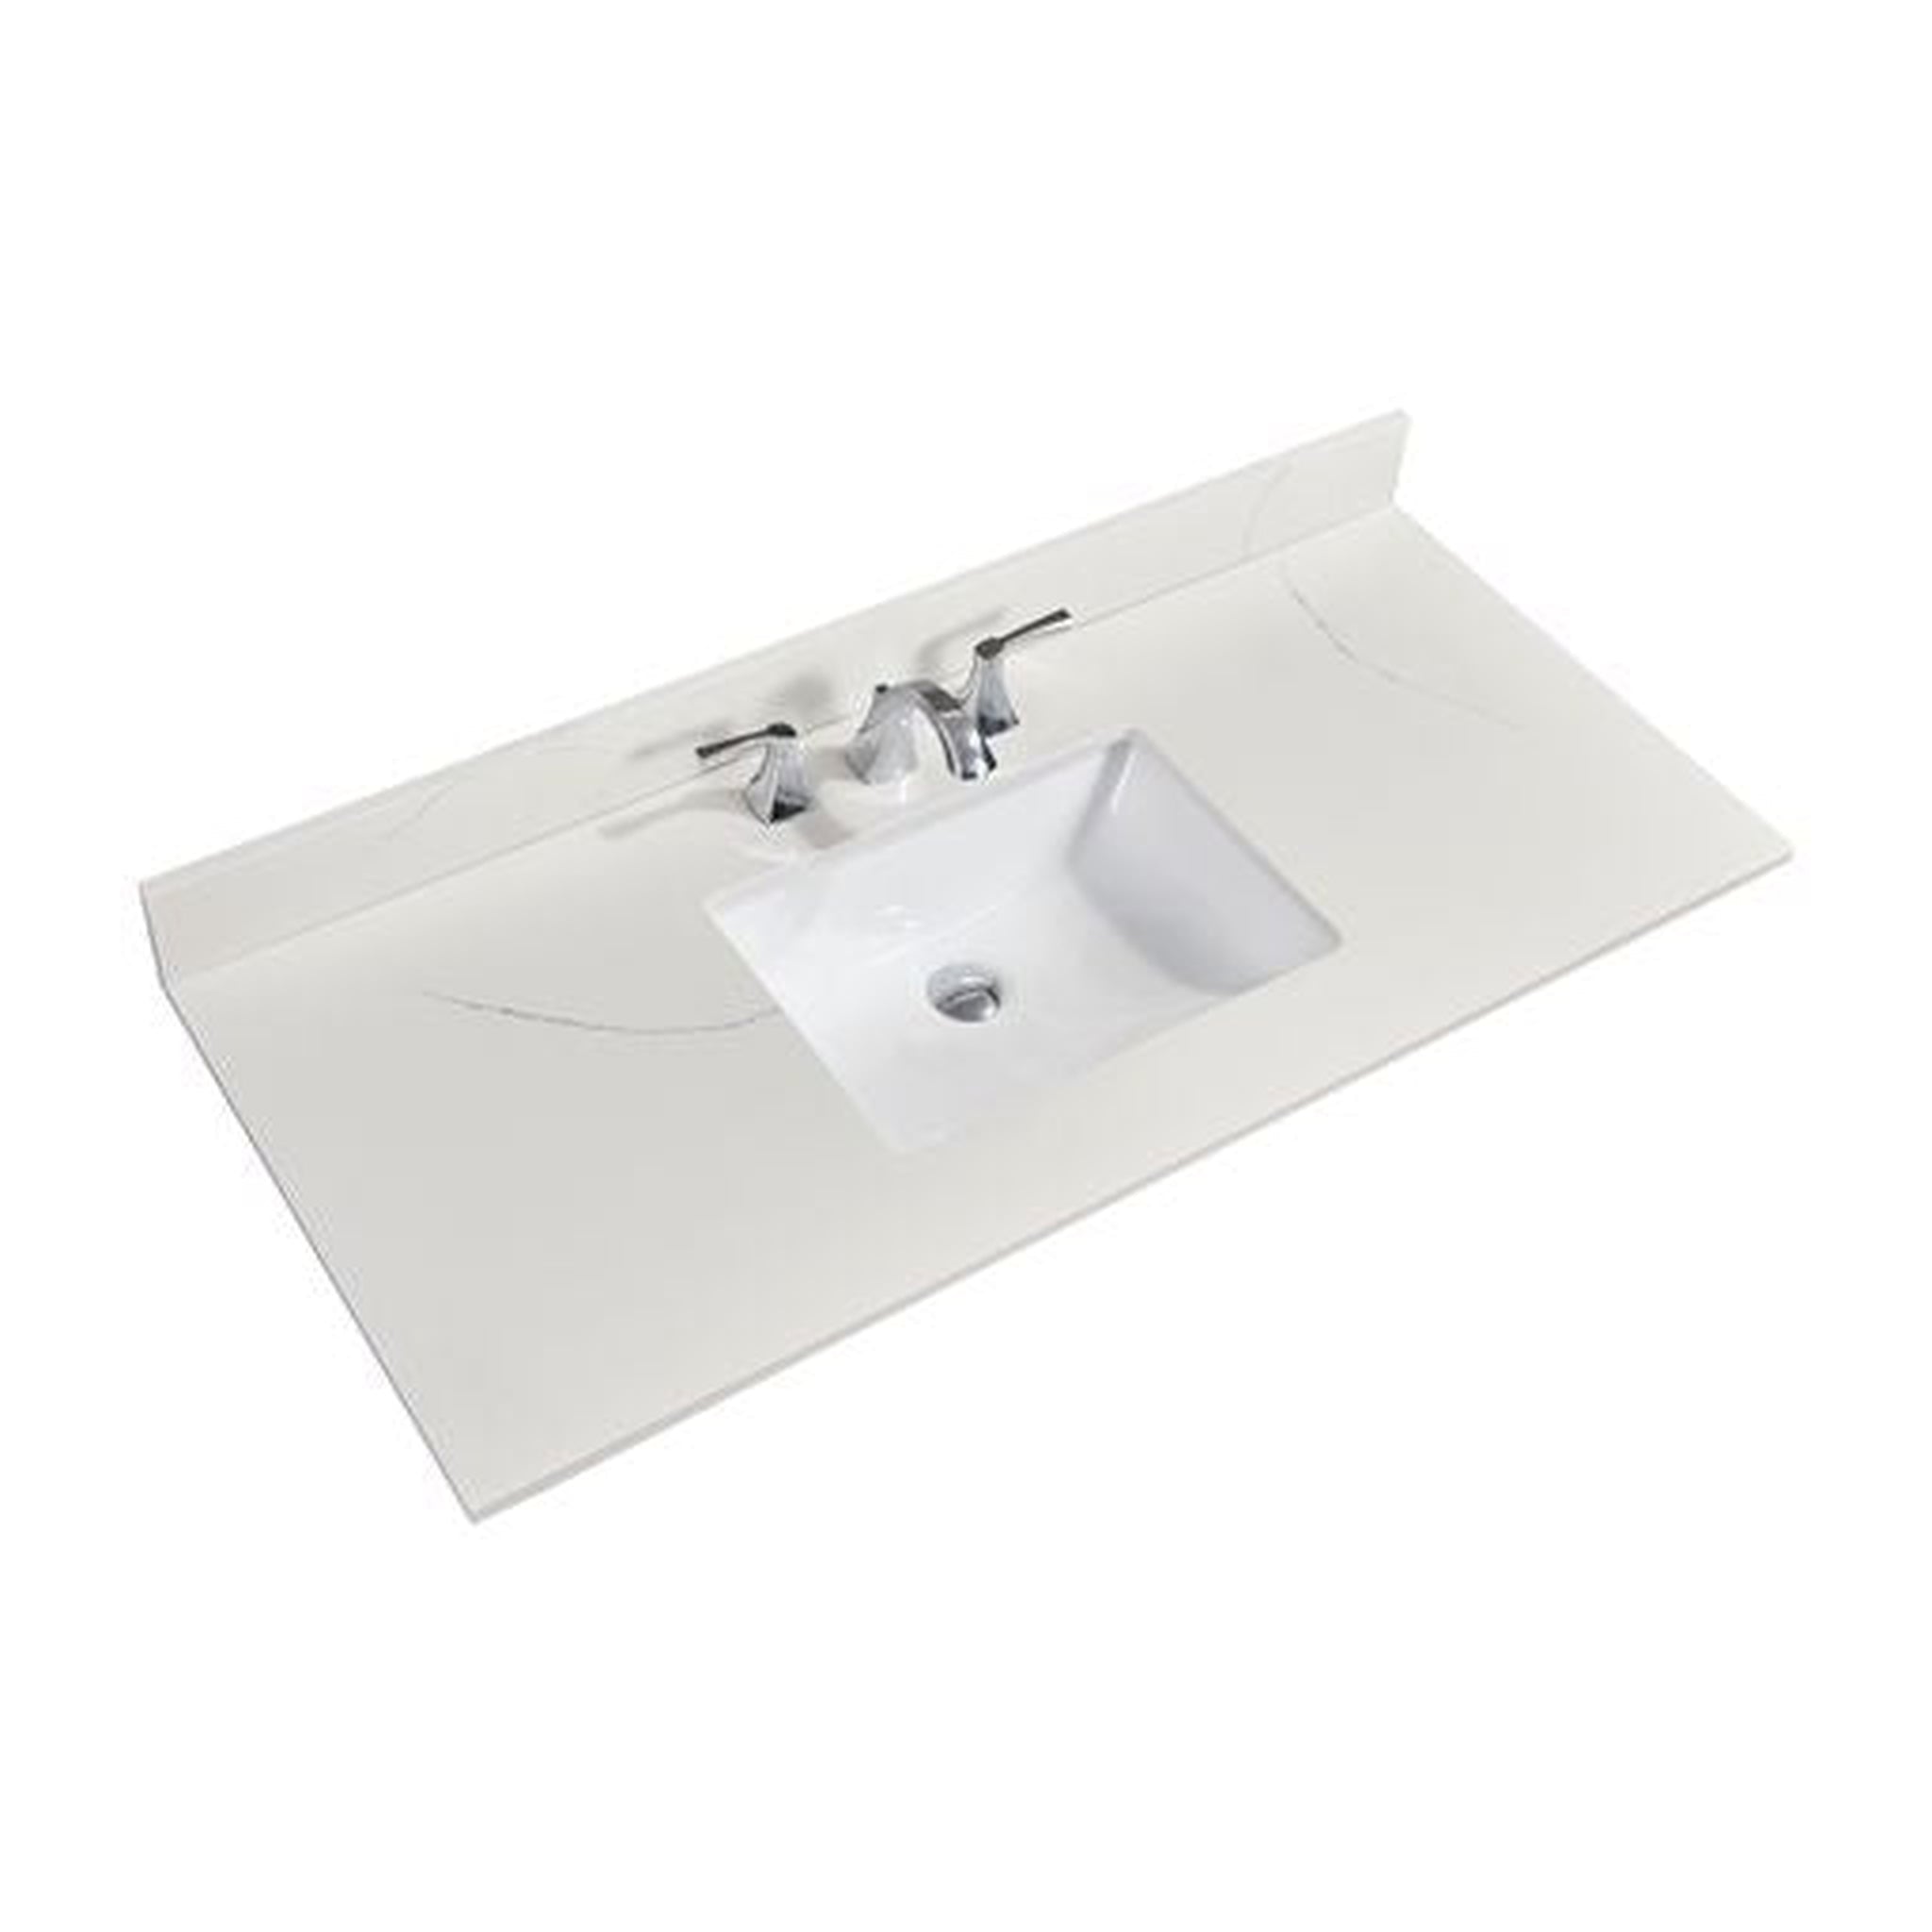 Altair, Altair Belluno 49" x 22" Milano White Composite Stone Bathroom Vanity Top With White SInk